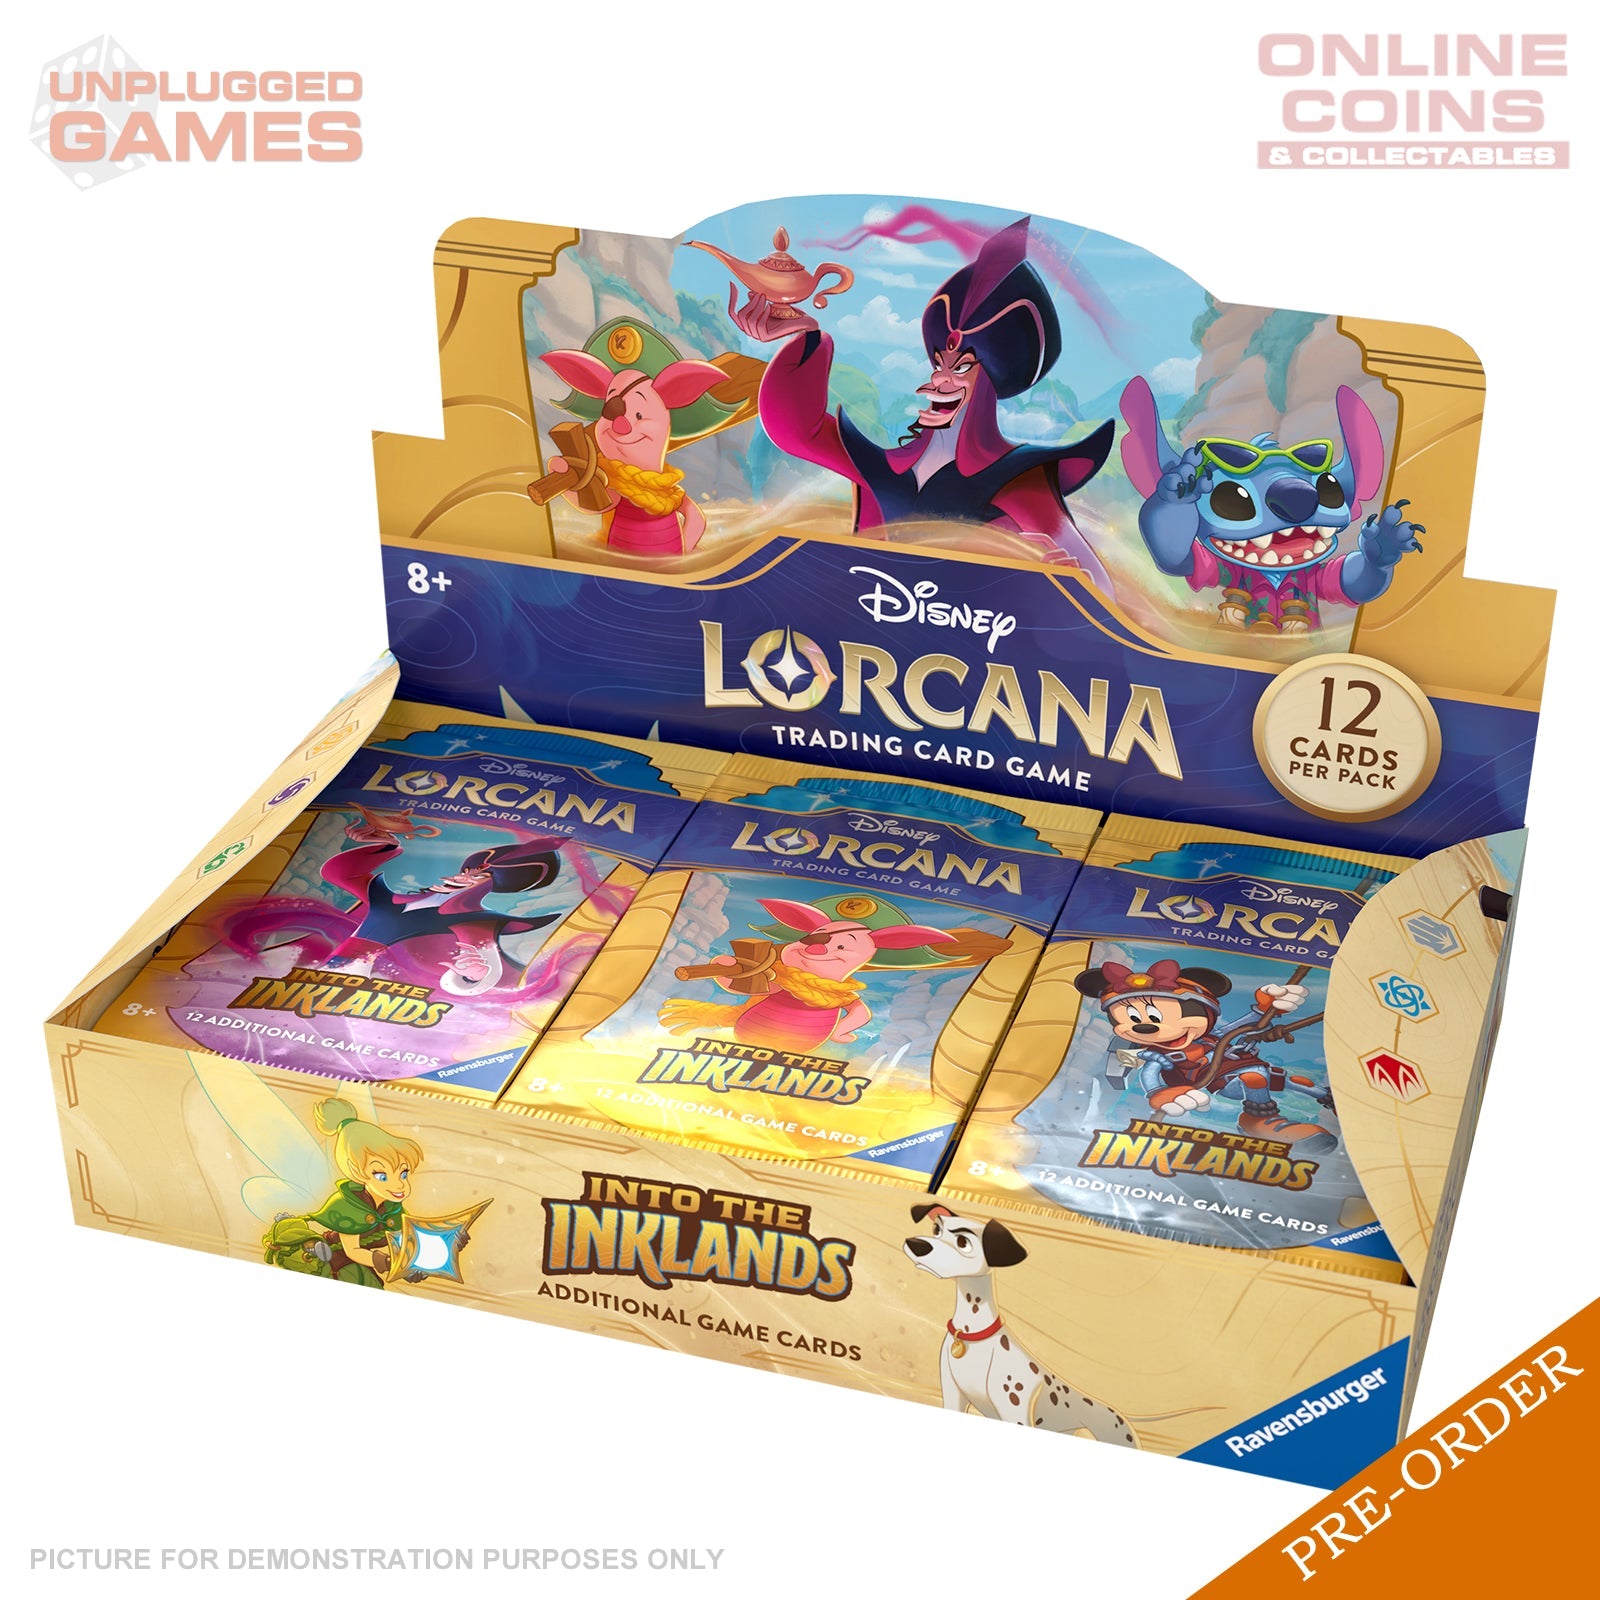 Lorcana - Series 3 - DLC Into The Inklands - Booster Box - PRE-ORDER